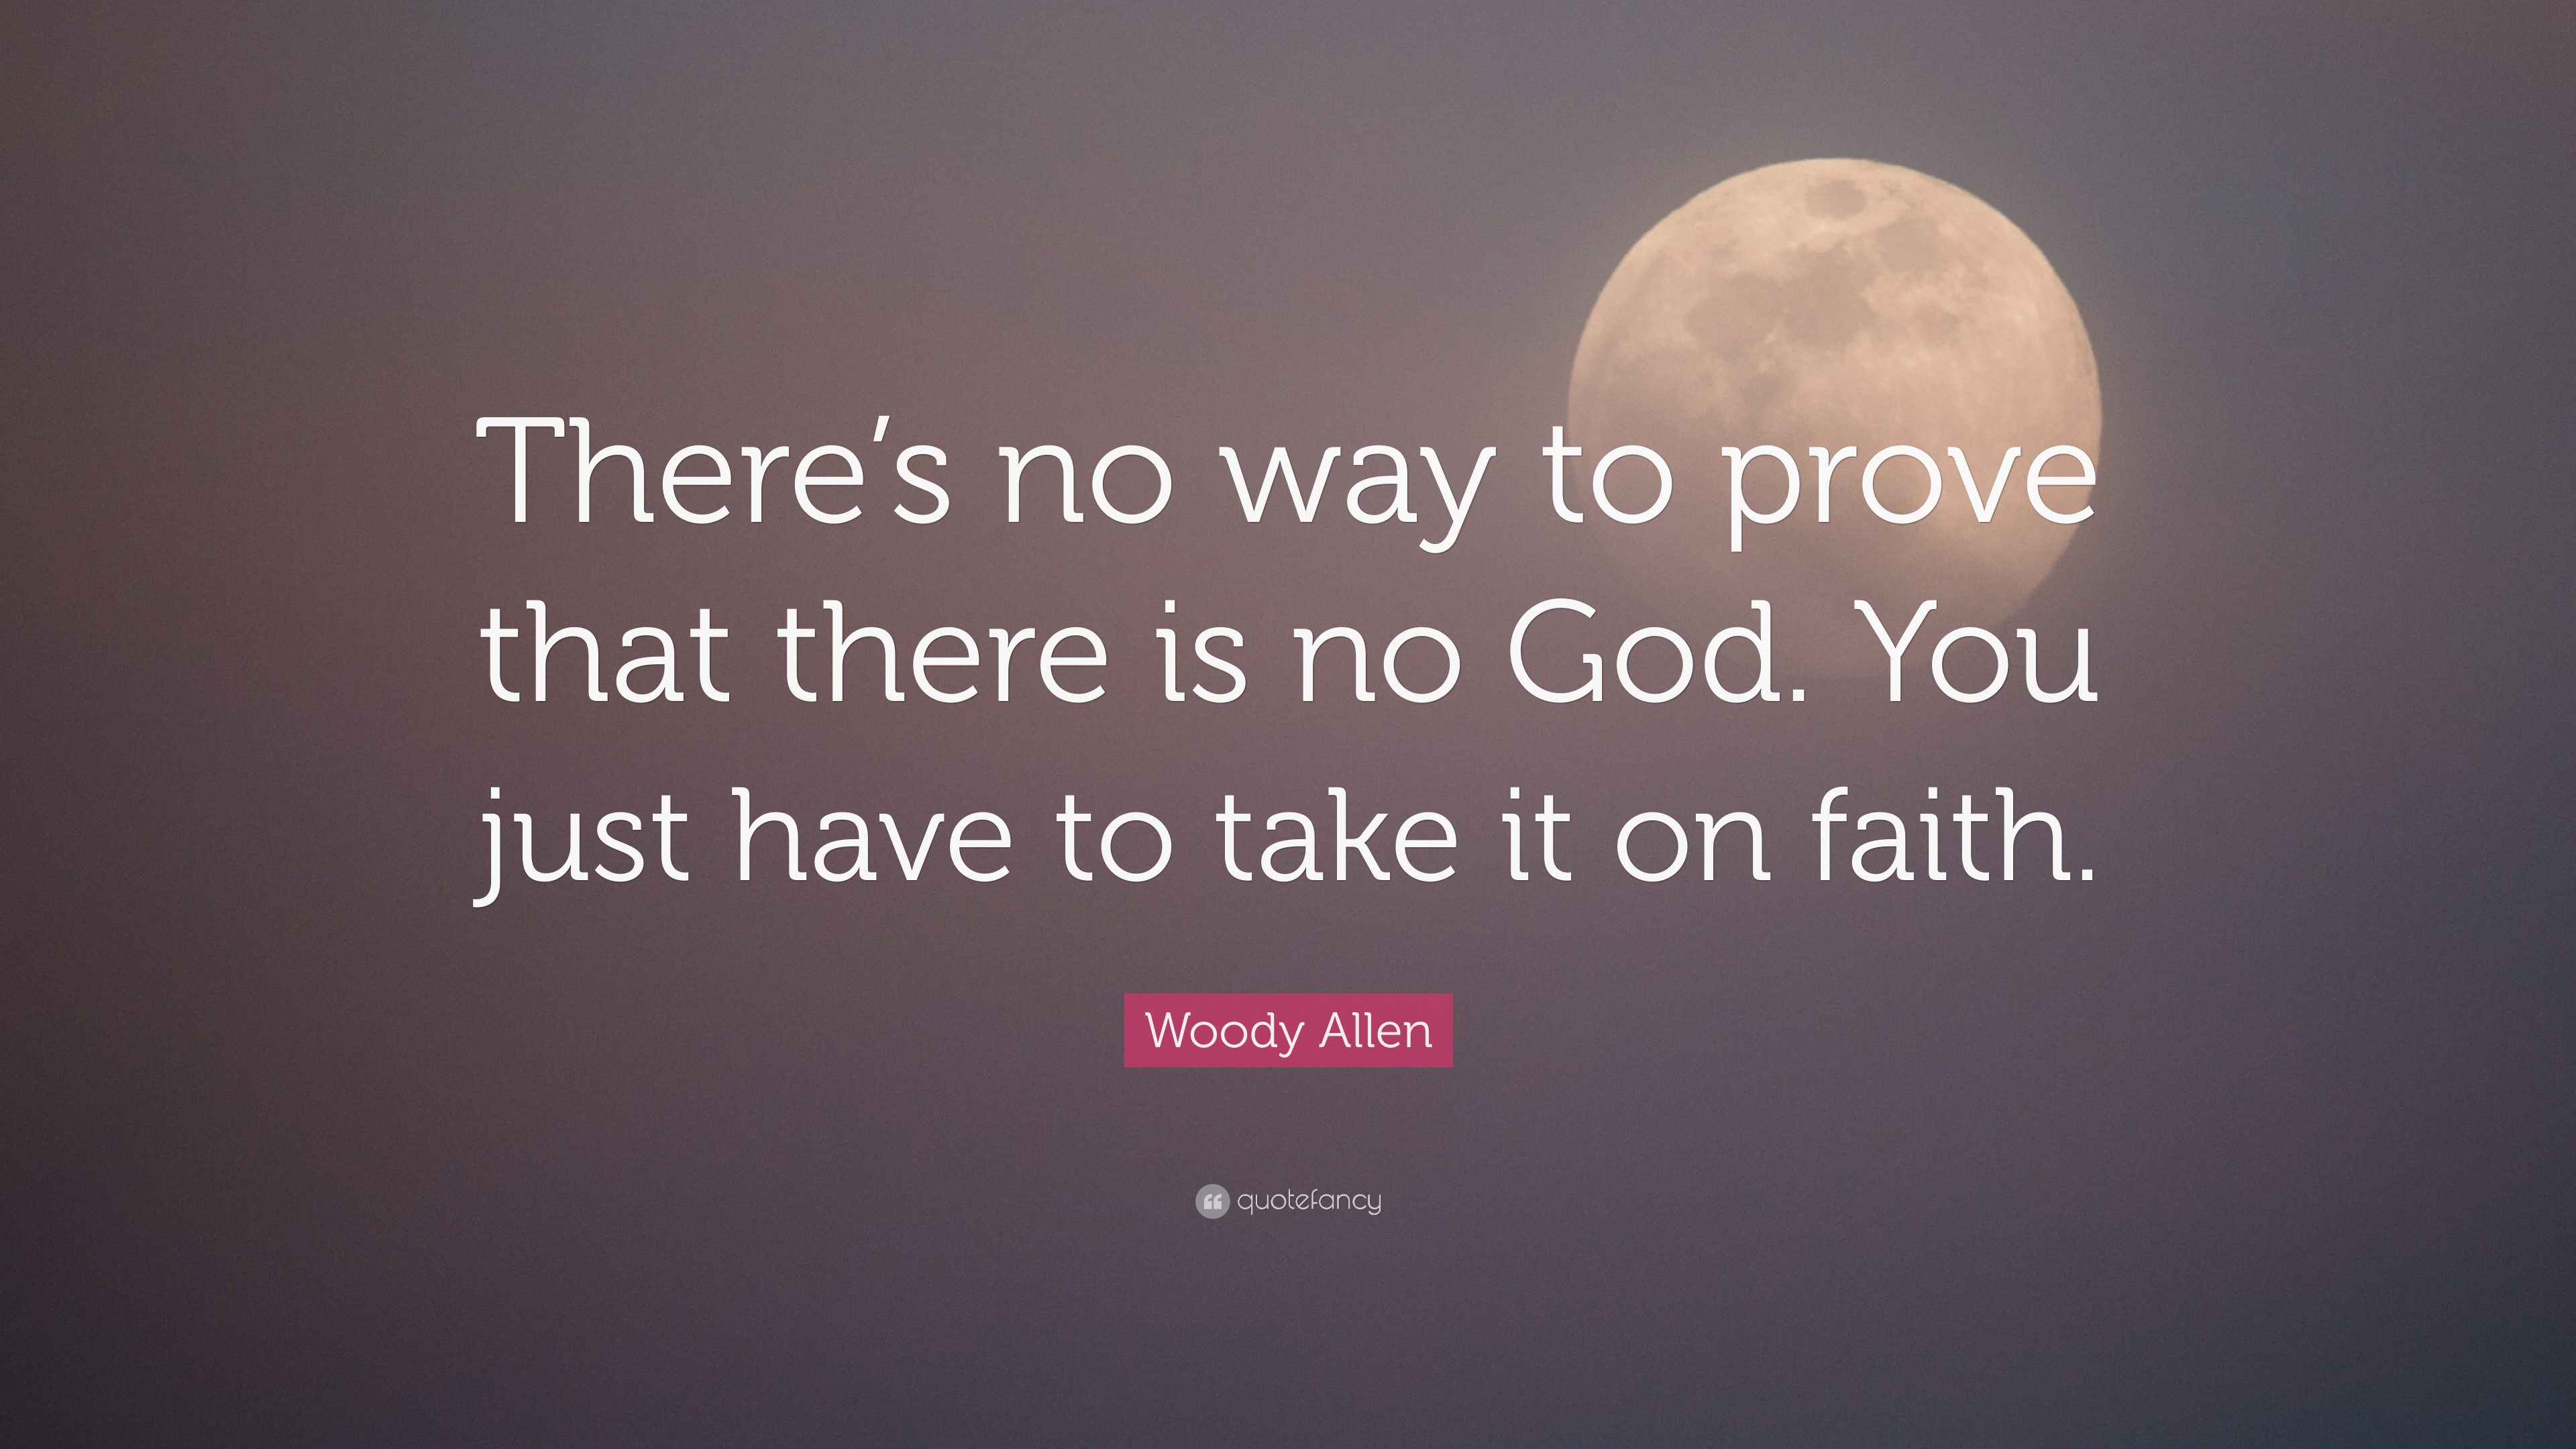 Woody Allen Quote There S No Way To Prove That There Is No God You Just Have